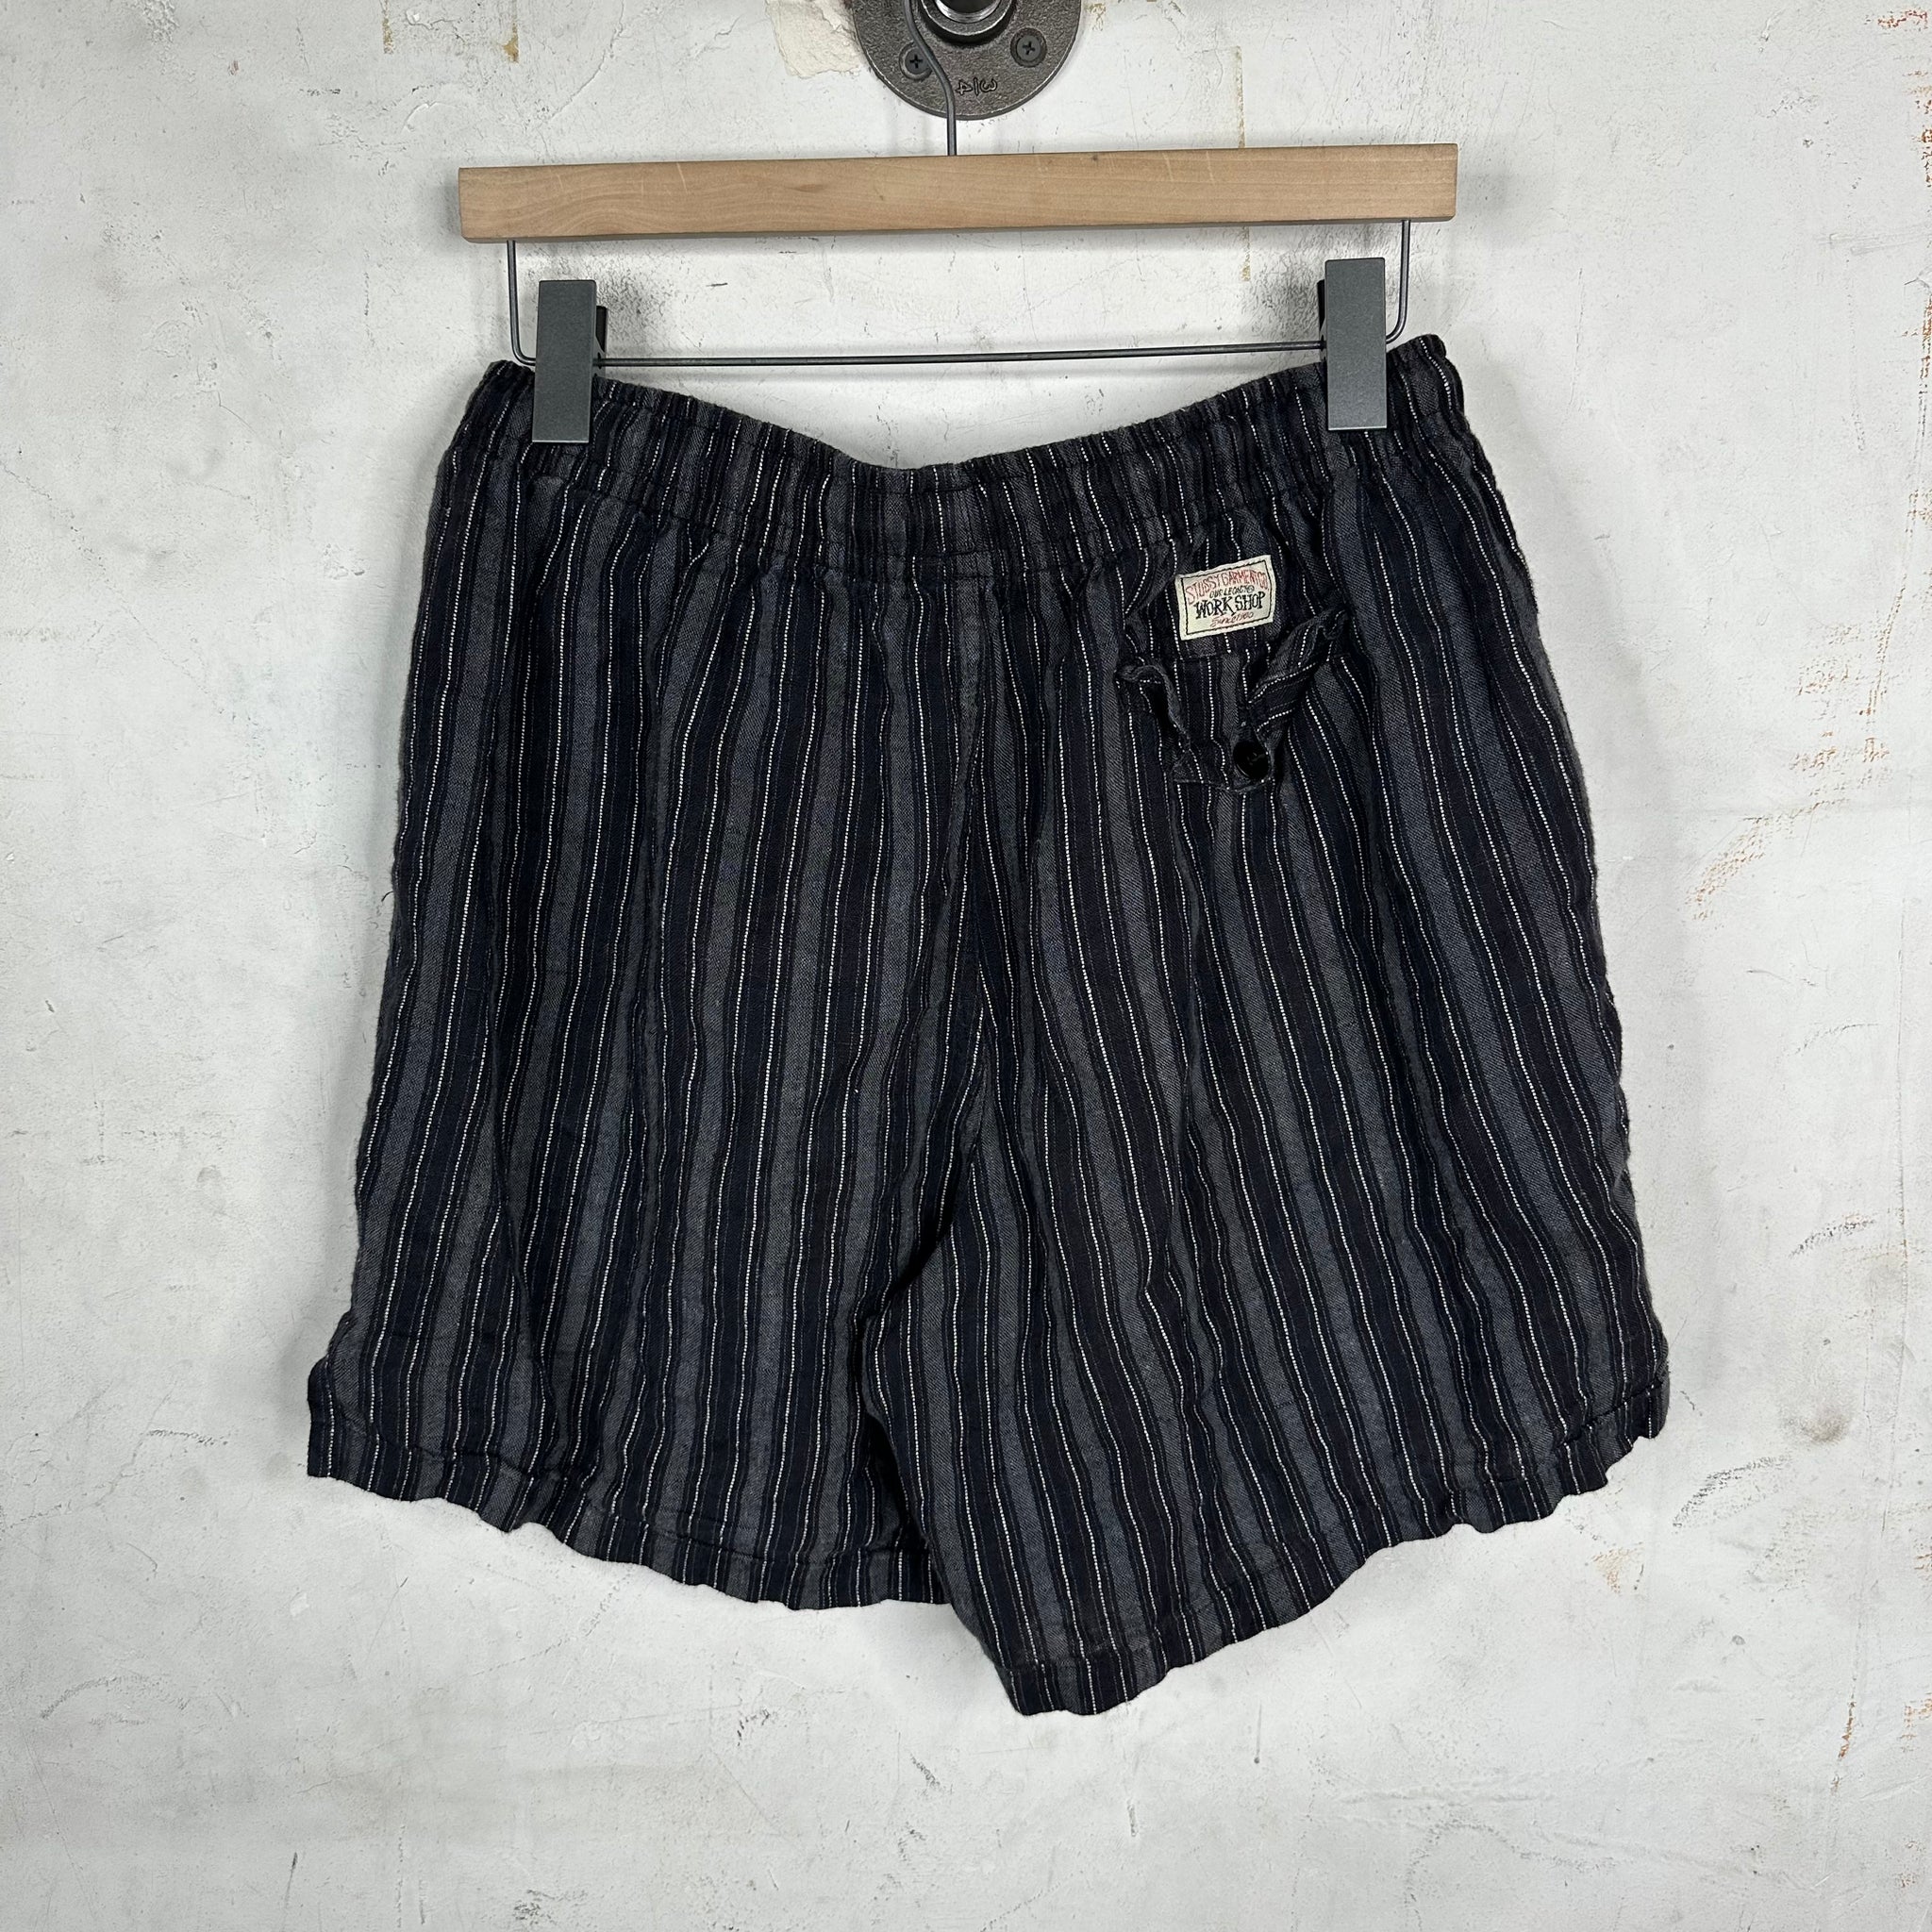 Stussy x Our Legacy Striped Cotton Shorts